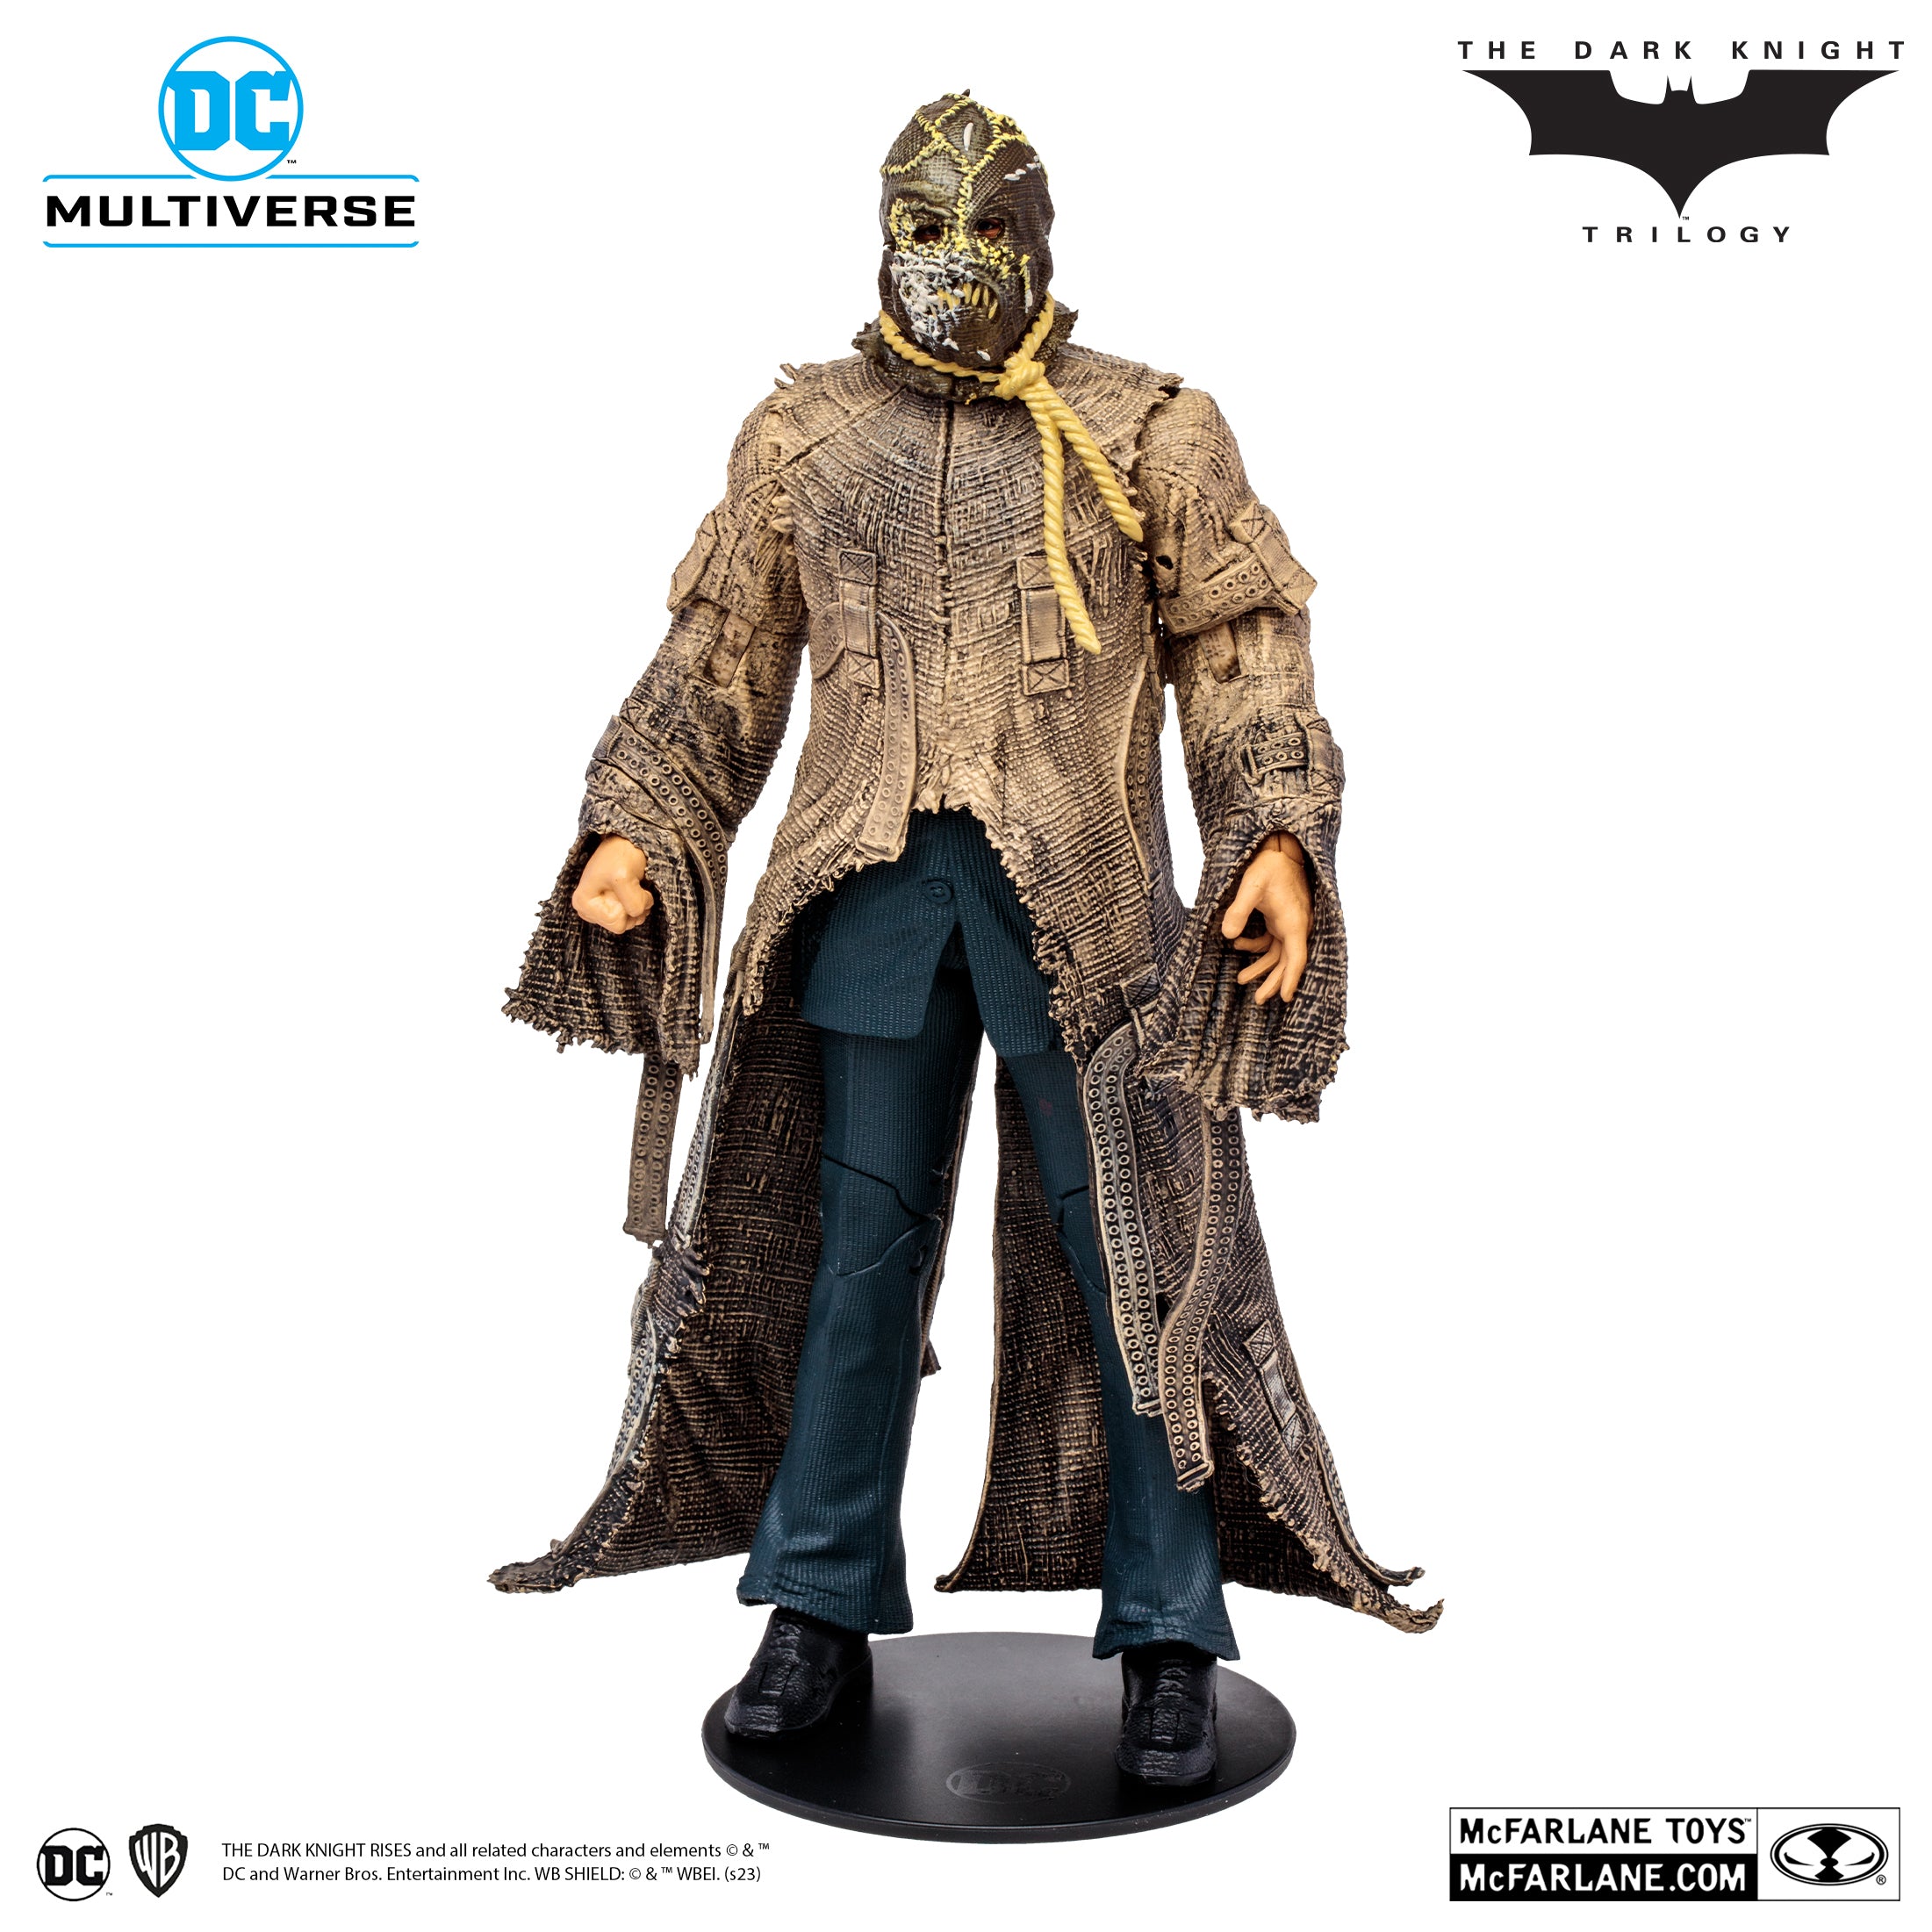 SCARECROWS (THE DARK KNIGHT TRILOGY) BY MCFARLANE